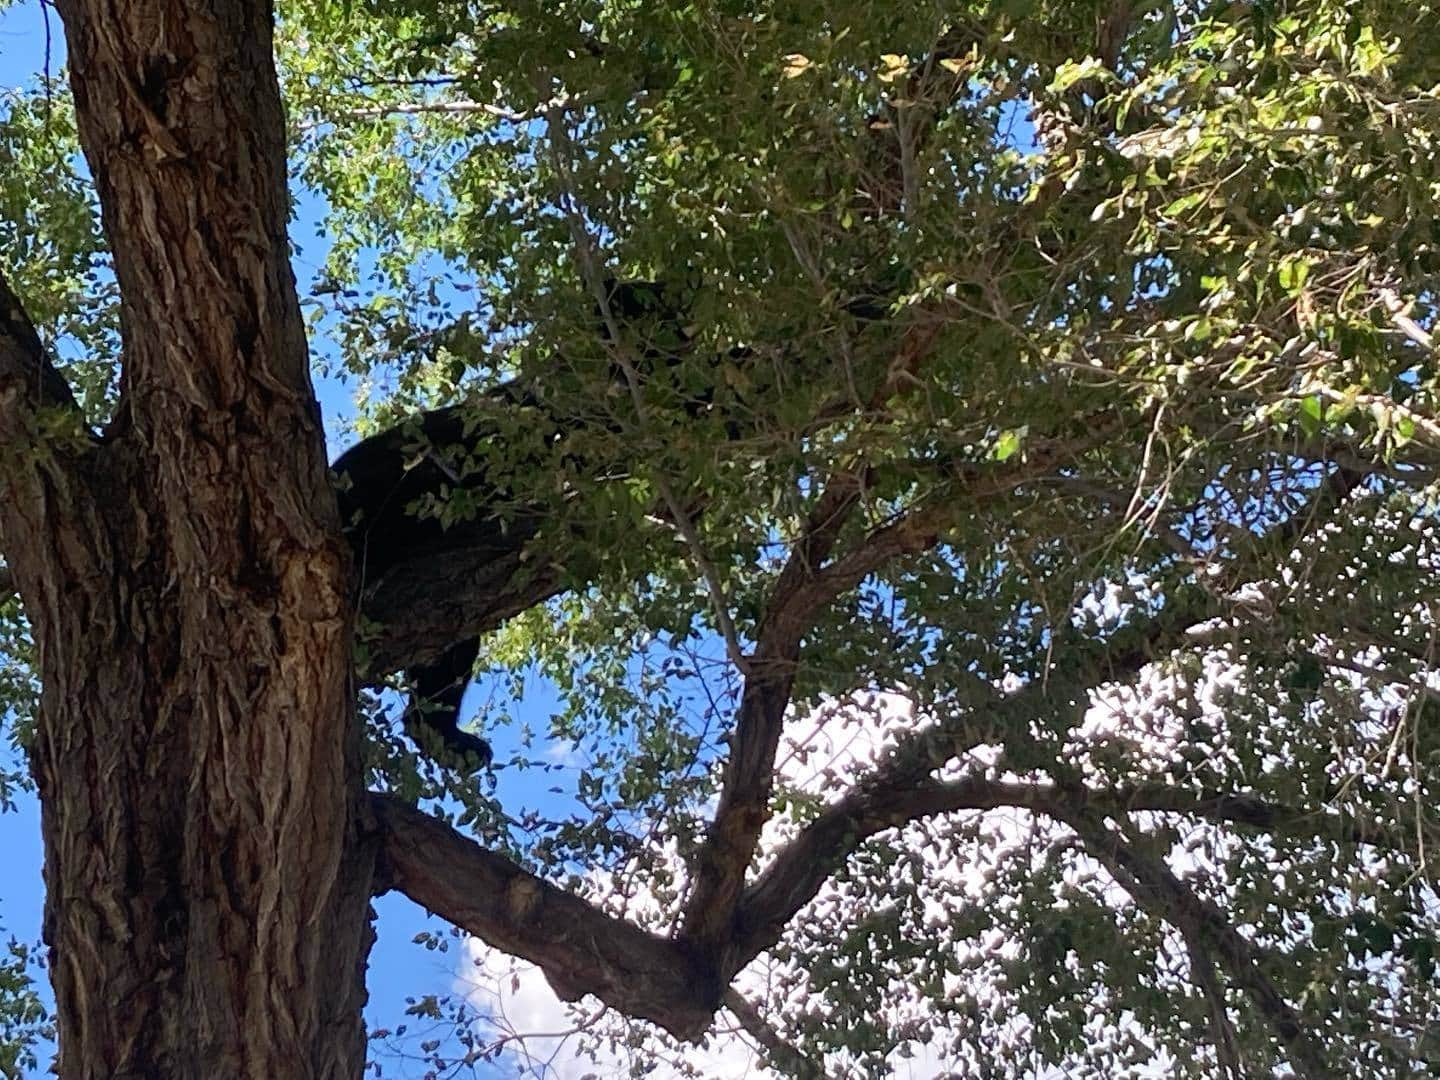 Stay In Salida Blog - hungry bear up in the tree in Salida